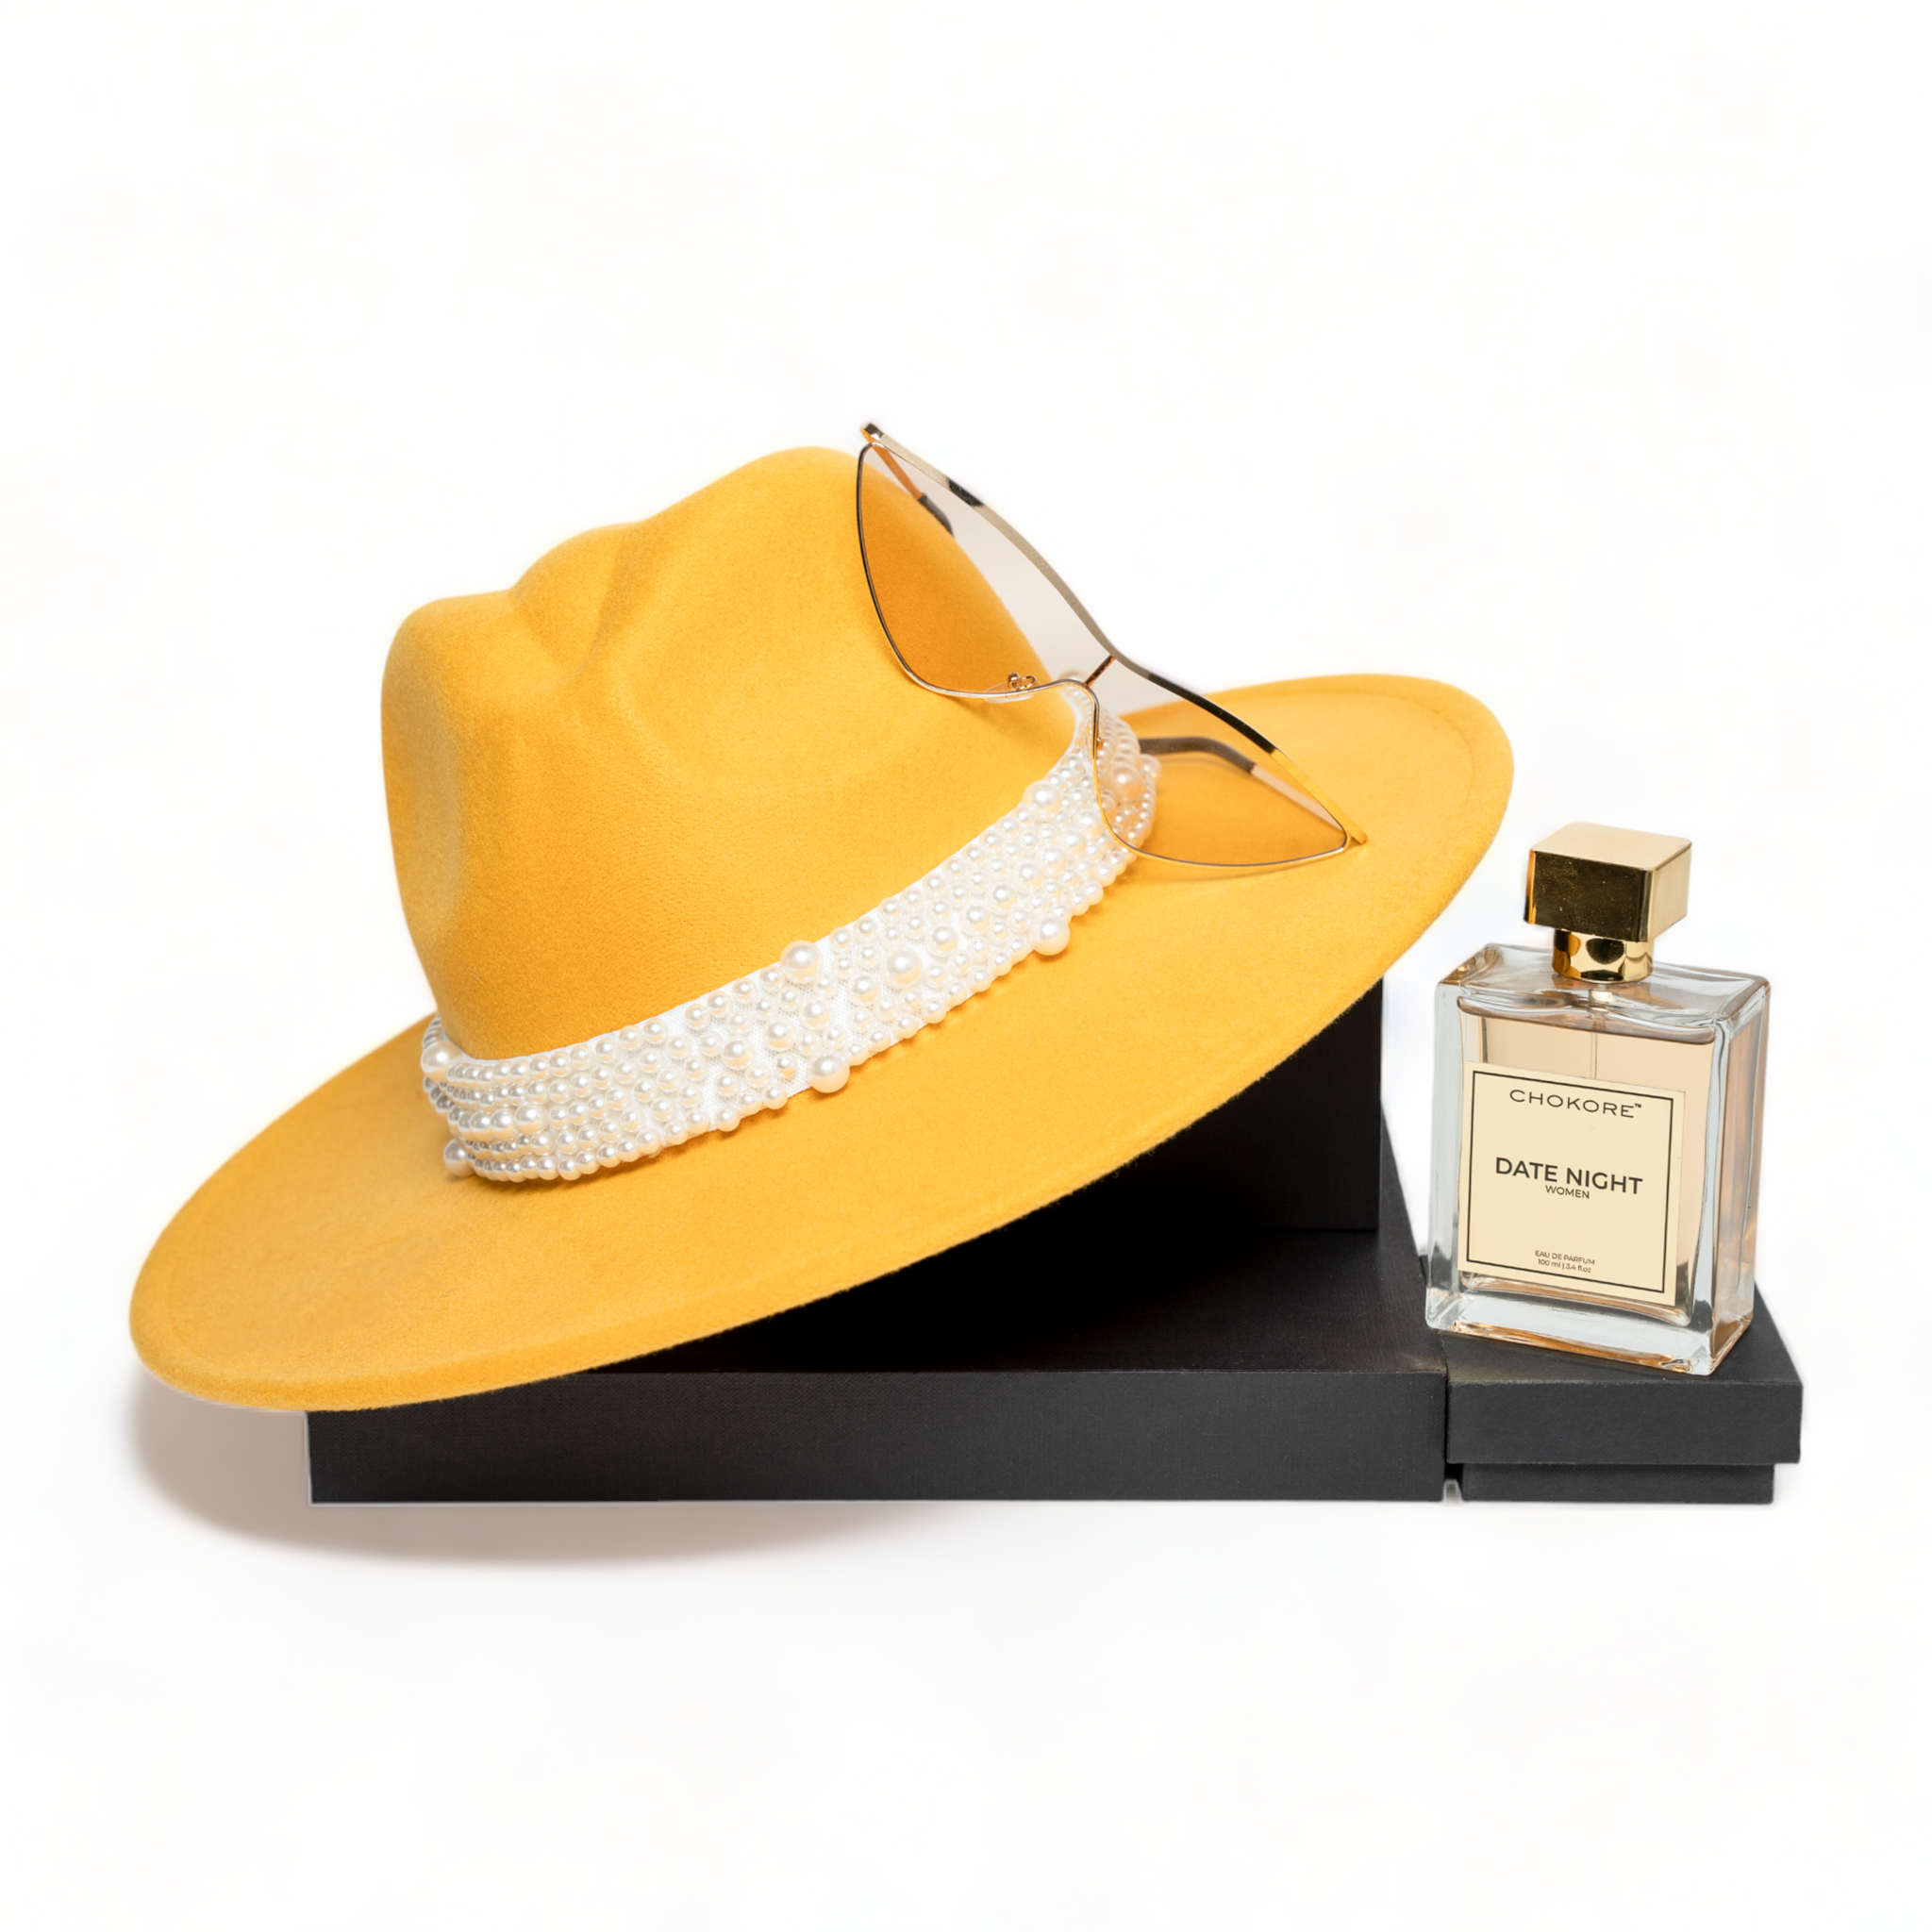 Chokore Special 3-in-1 Gift Set for Her (Pearl Embellished Hat, 100 ml Date Night Perfume, & Sunglasses)